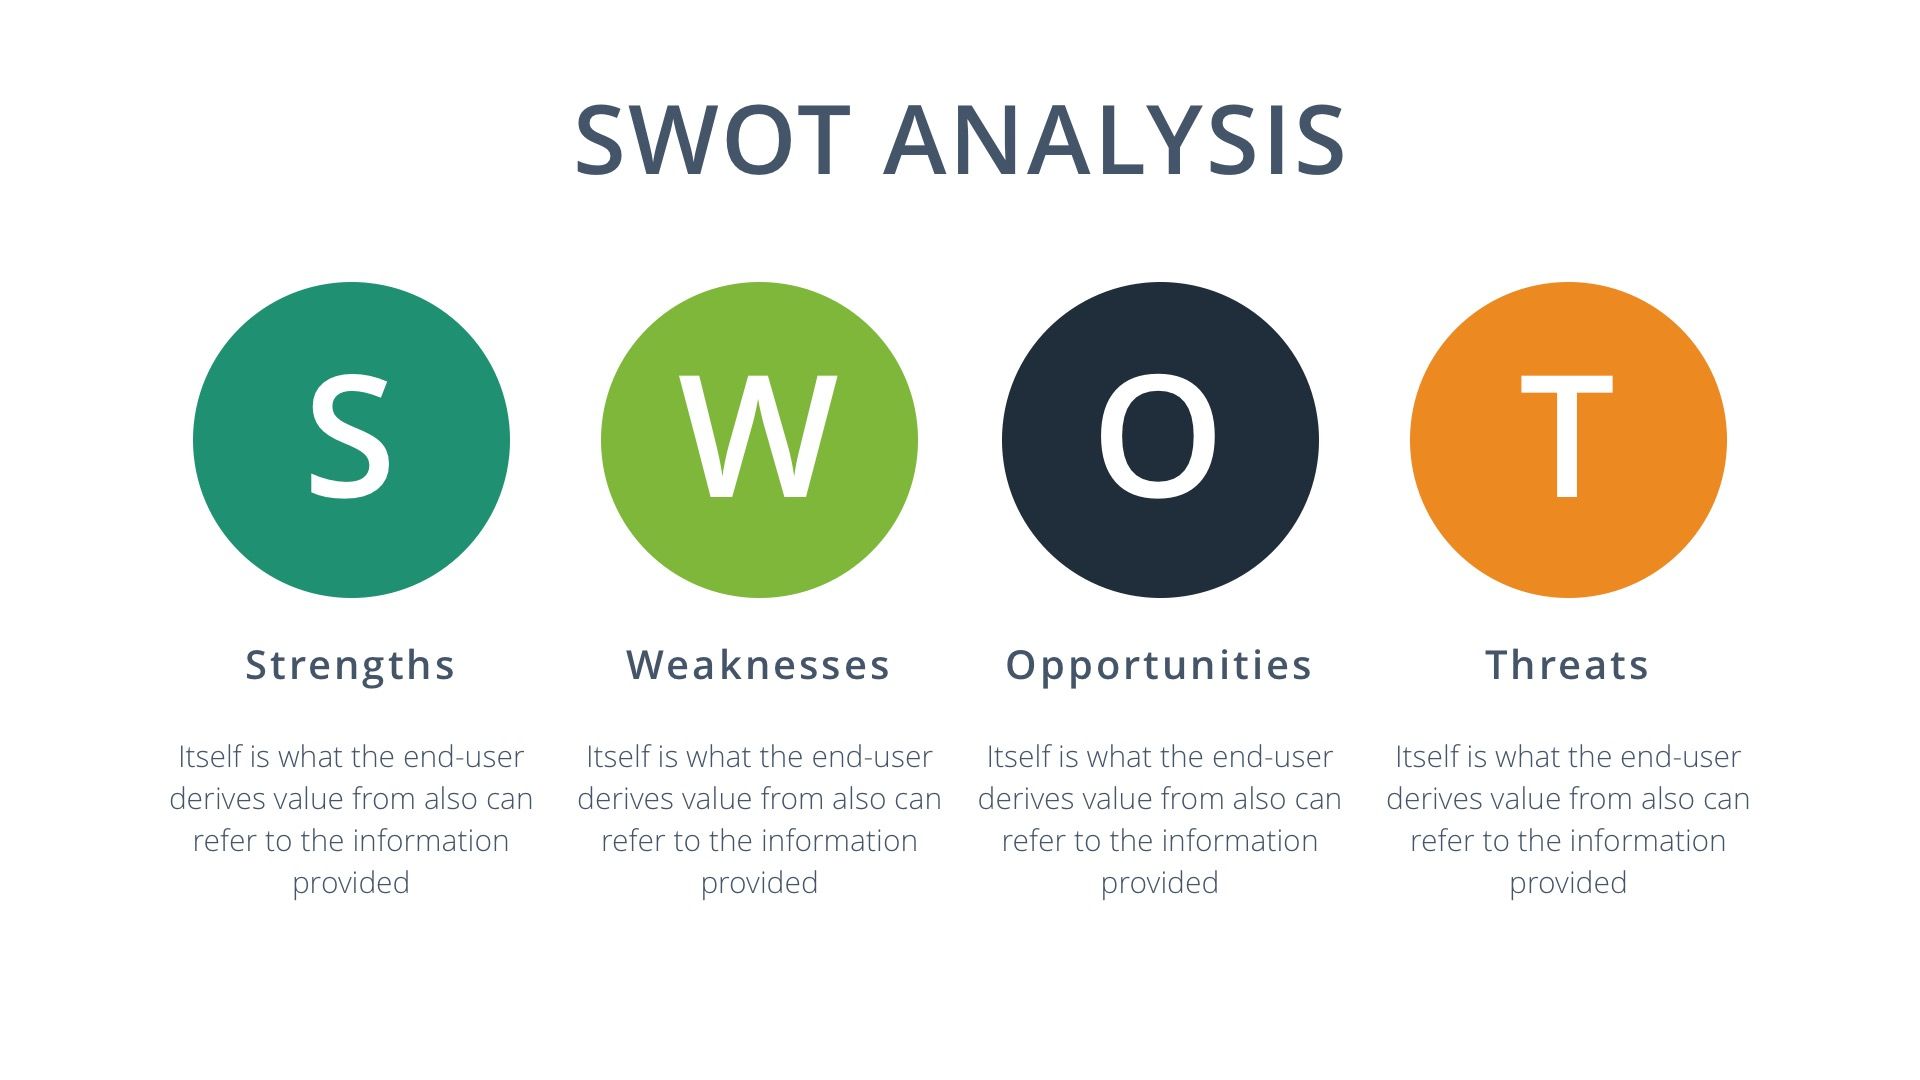 Free Swot Analysis Powerpoint Template Swot Analysis Template Swot Analysis Analysis